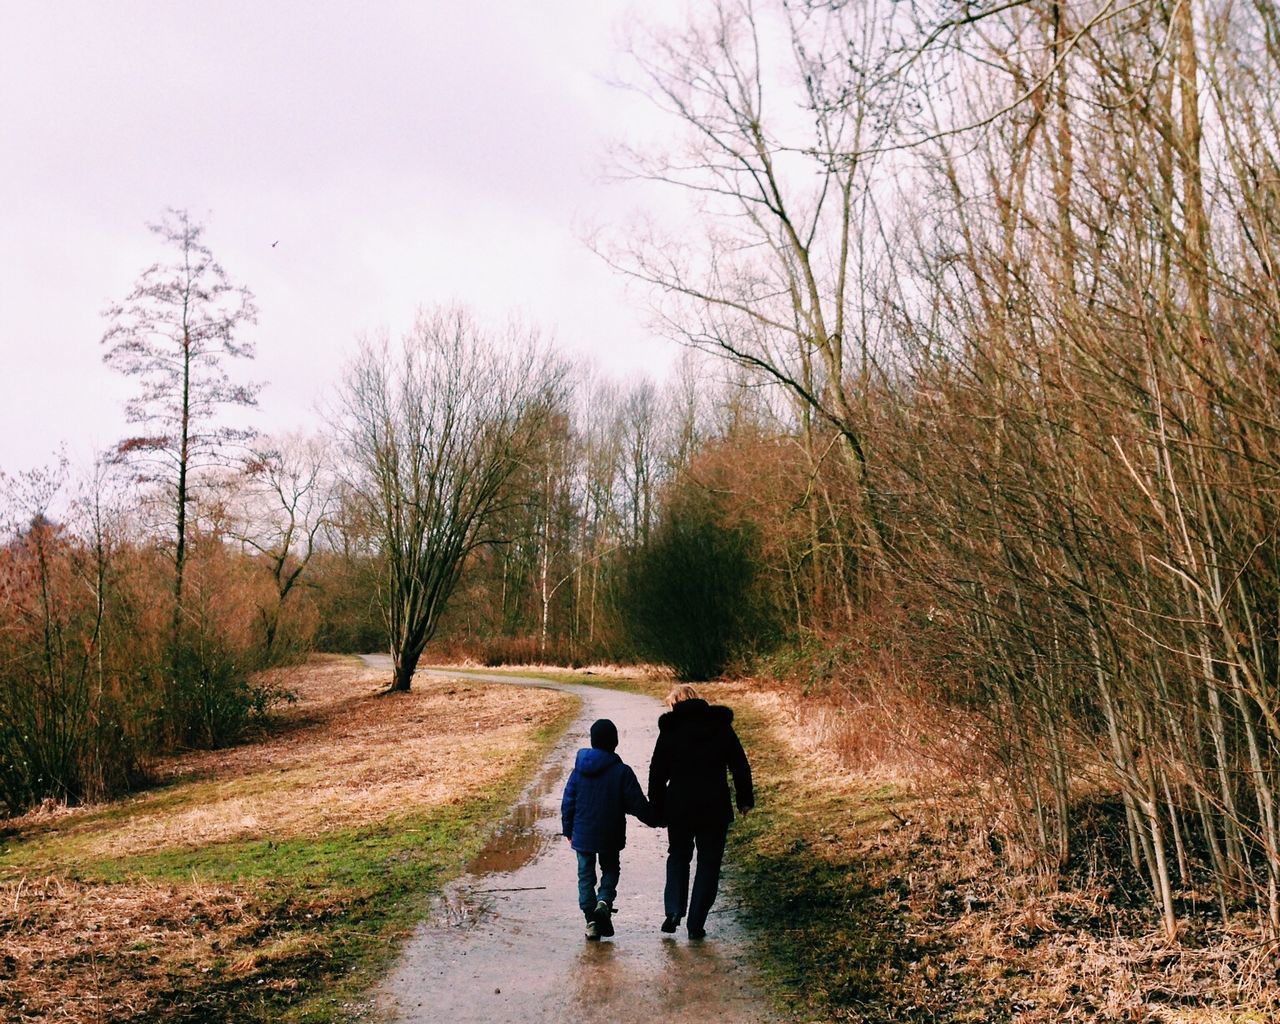 Rear view of man and boy walking on wet footpath by bare trees